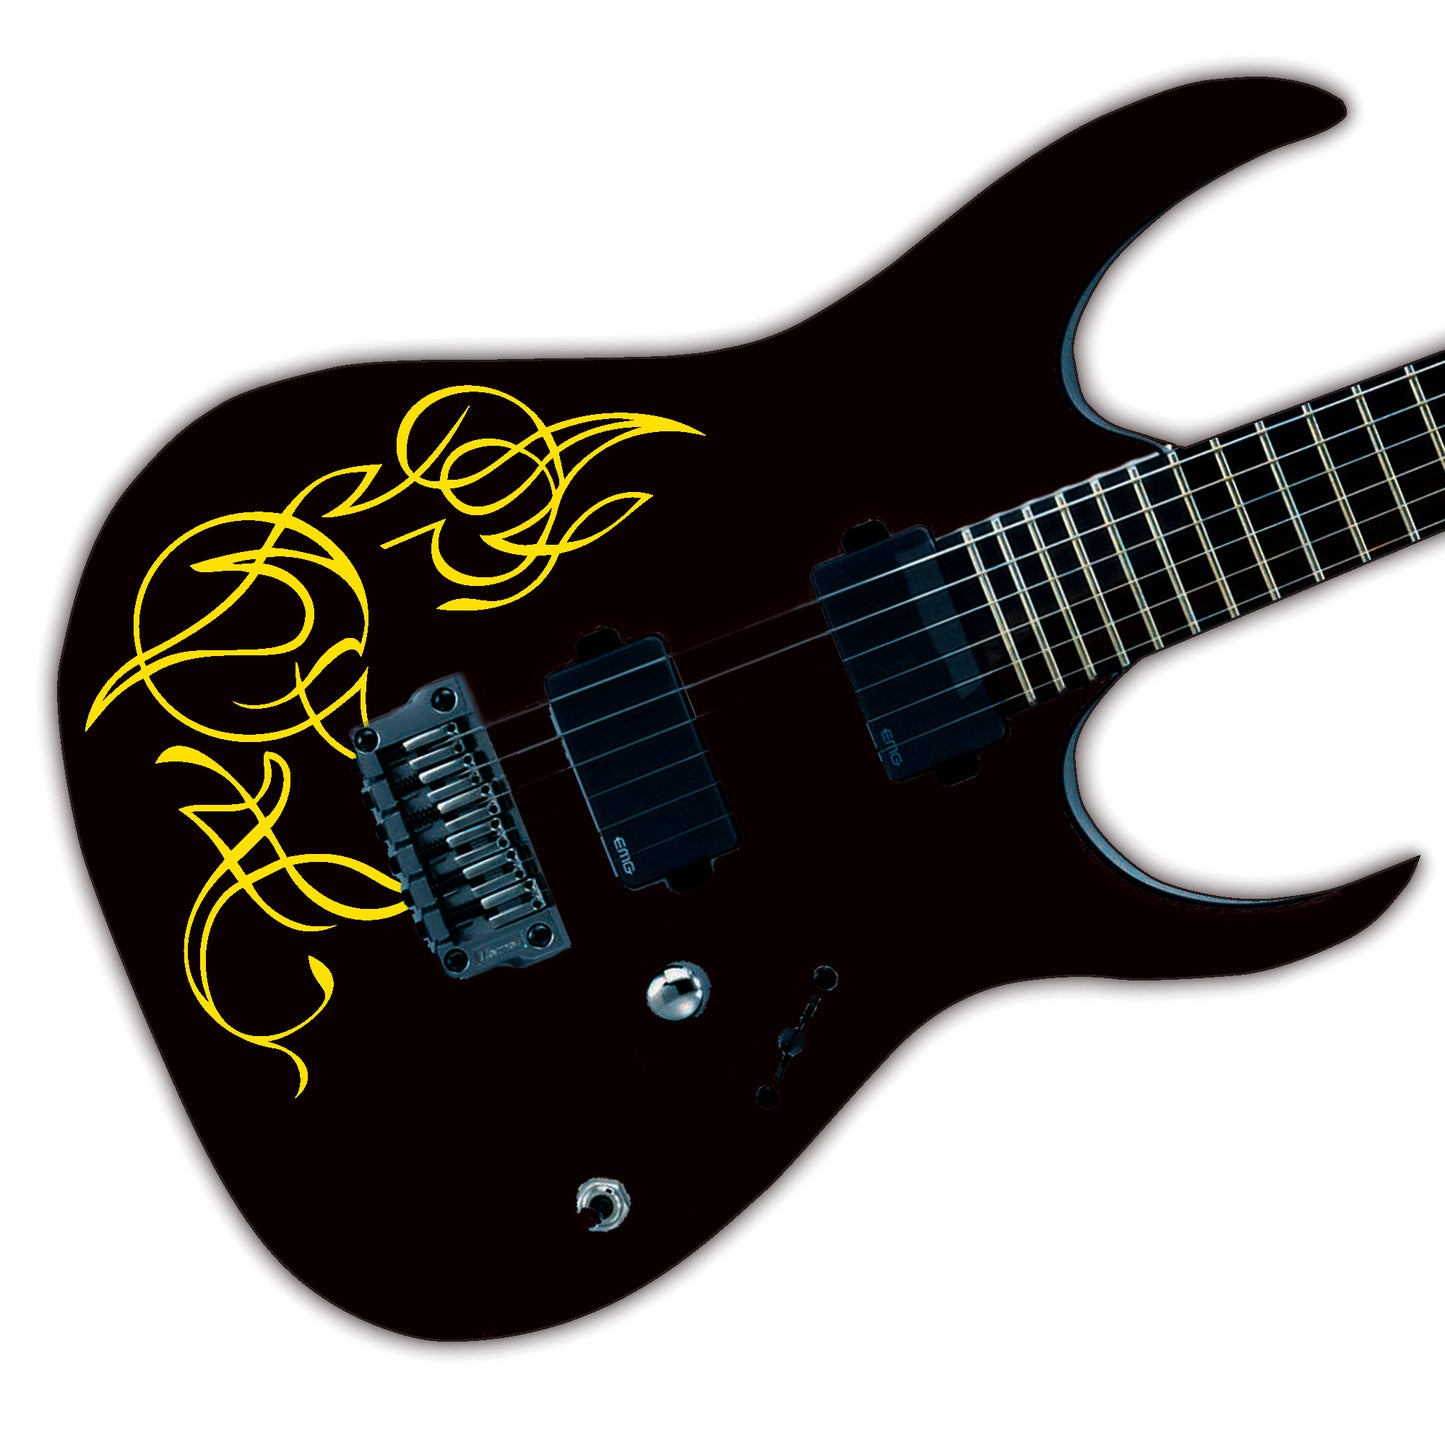 Custom Made Pin Stripe Swirl Decal Sticker Fits Guitars & Basses. Colour Options Available.